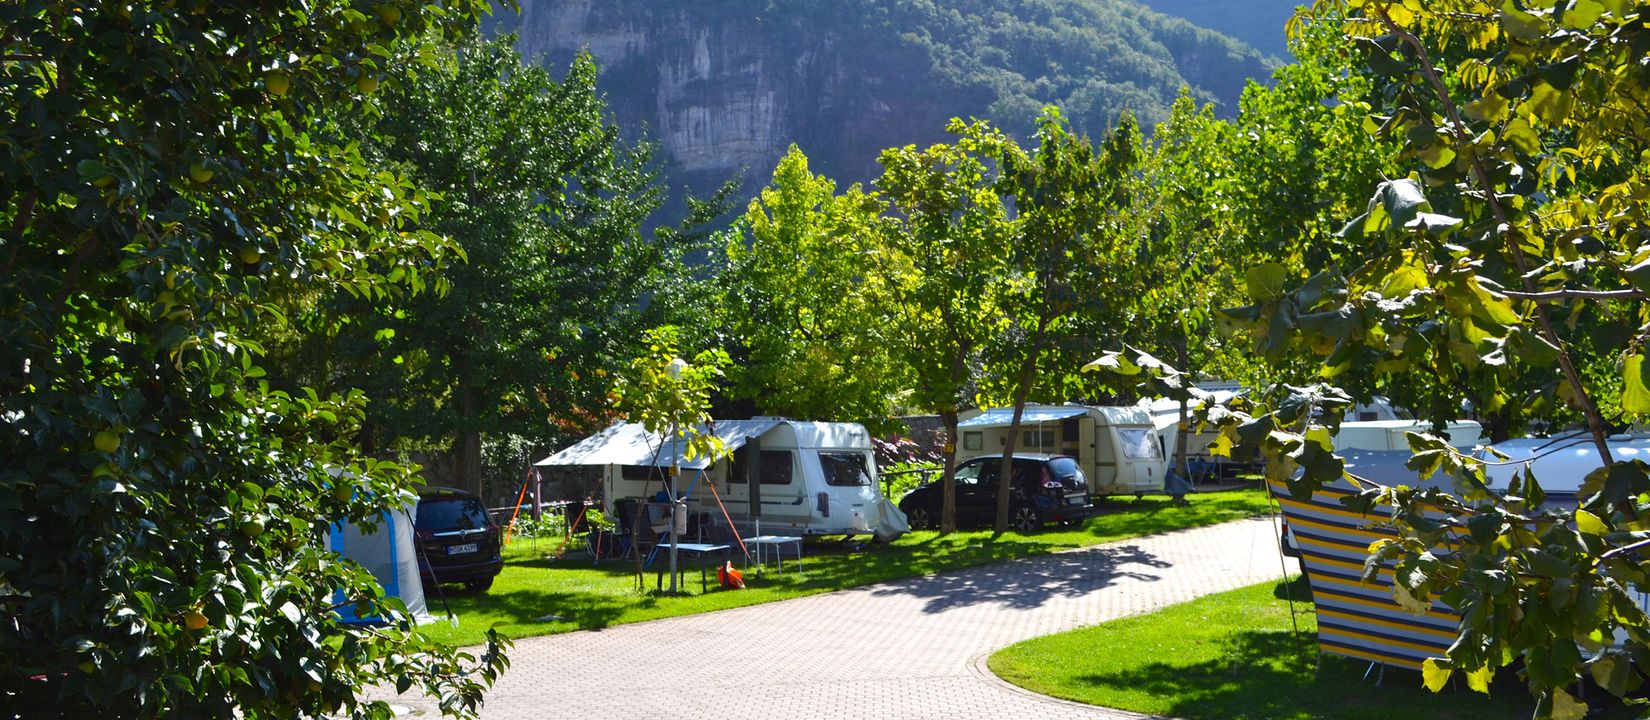 Offers camping